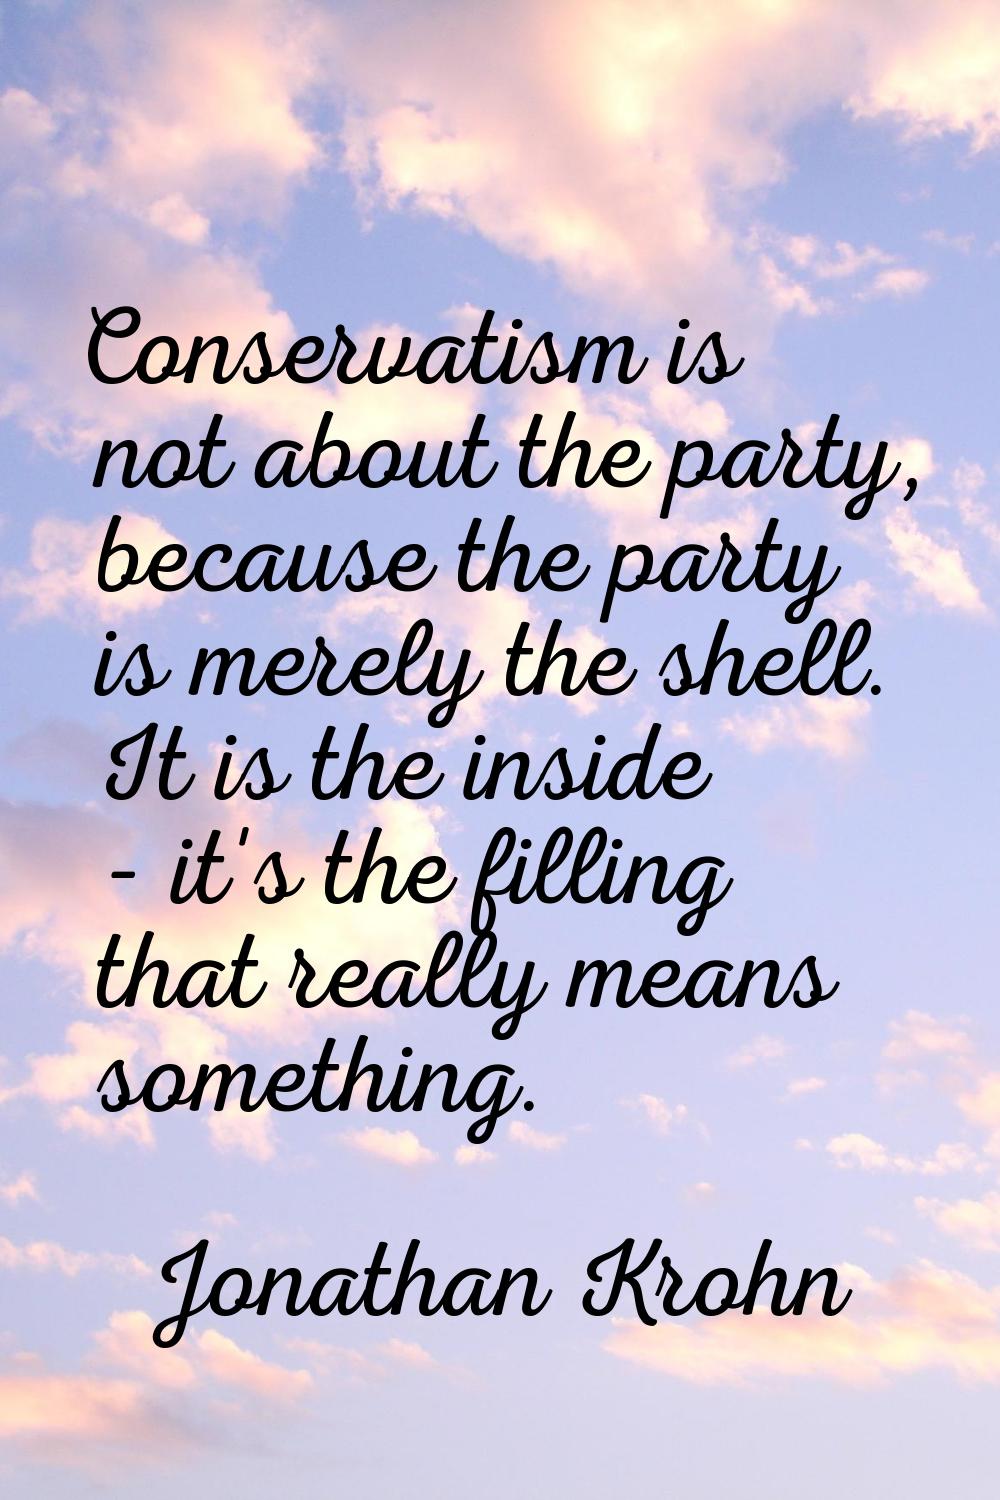 Conservatism is not about the party, because the party is merely the shell. It is the inside - it's